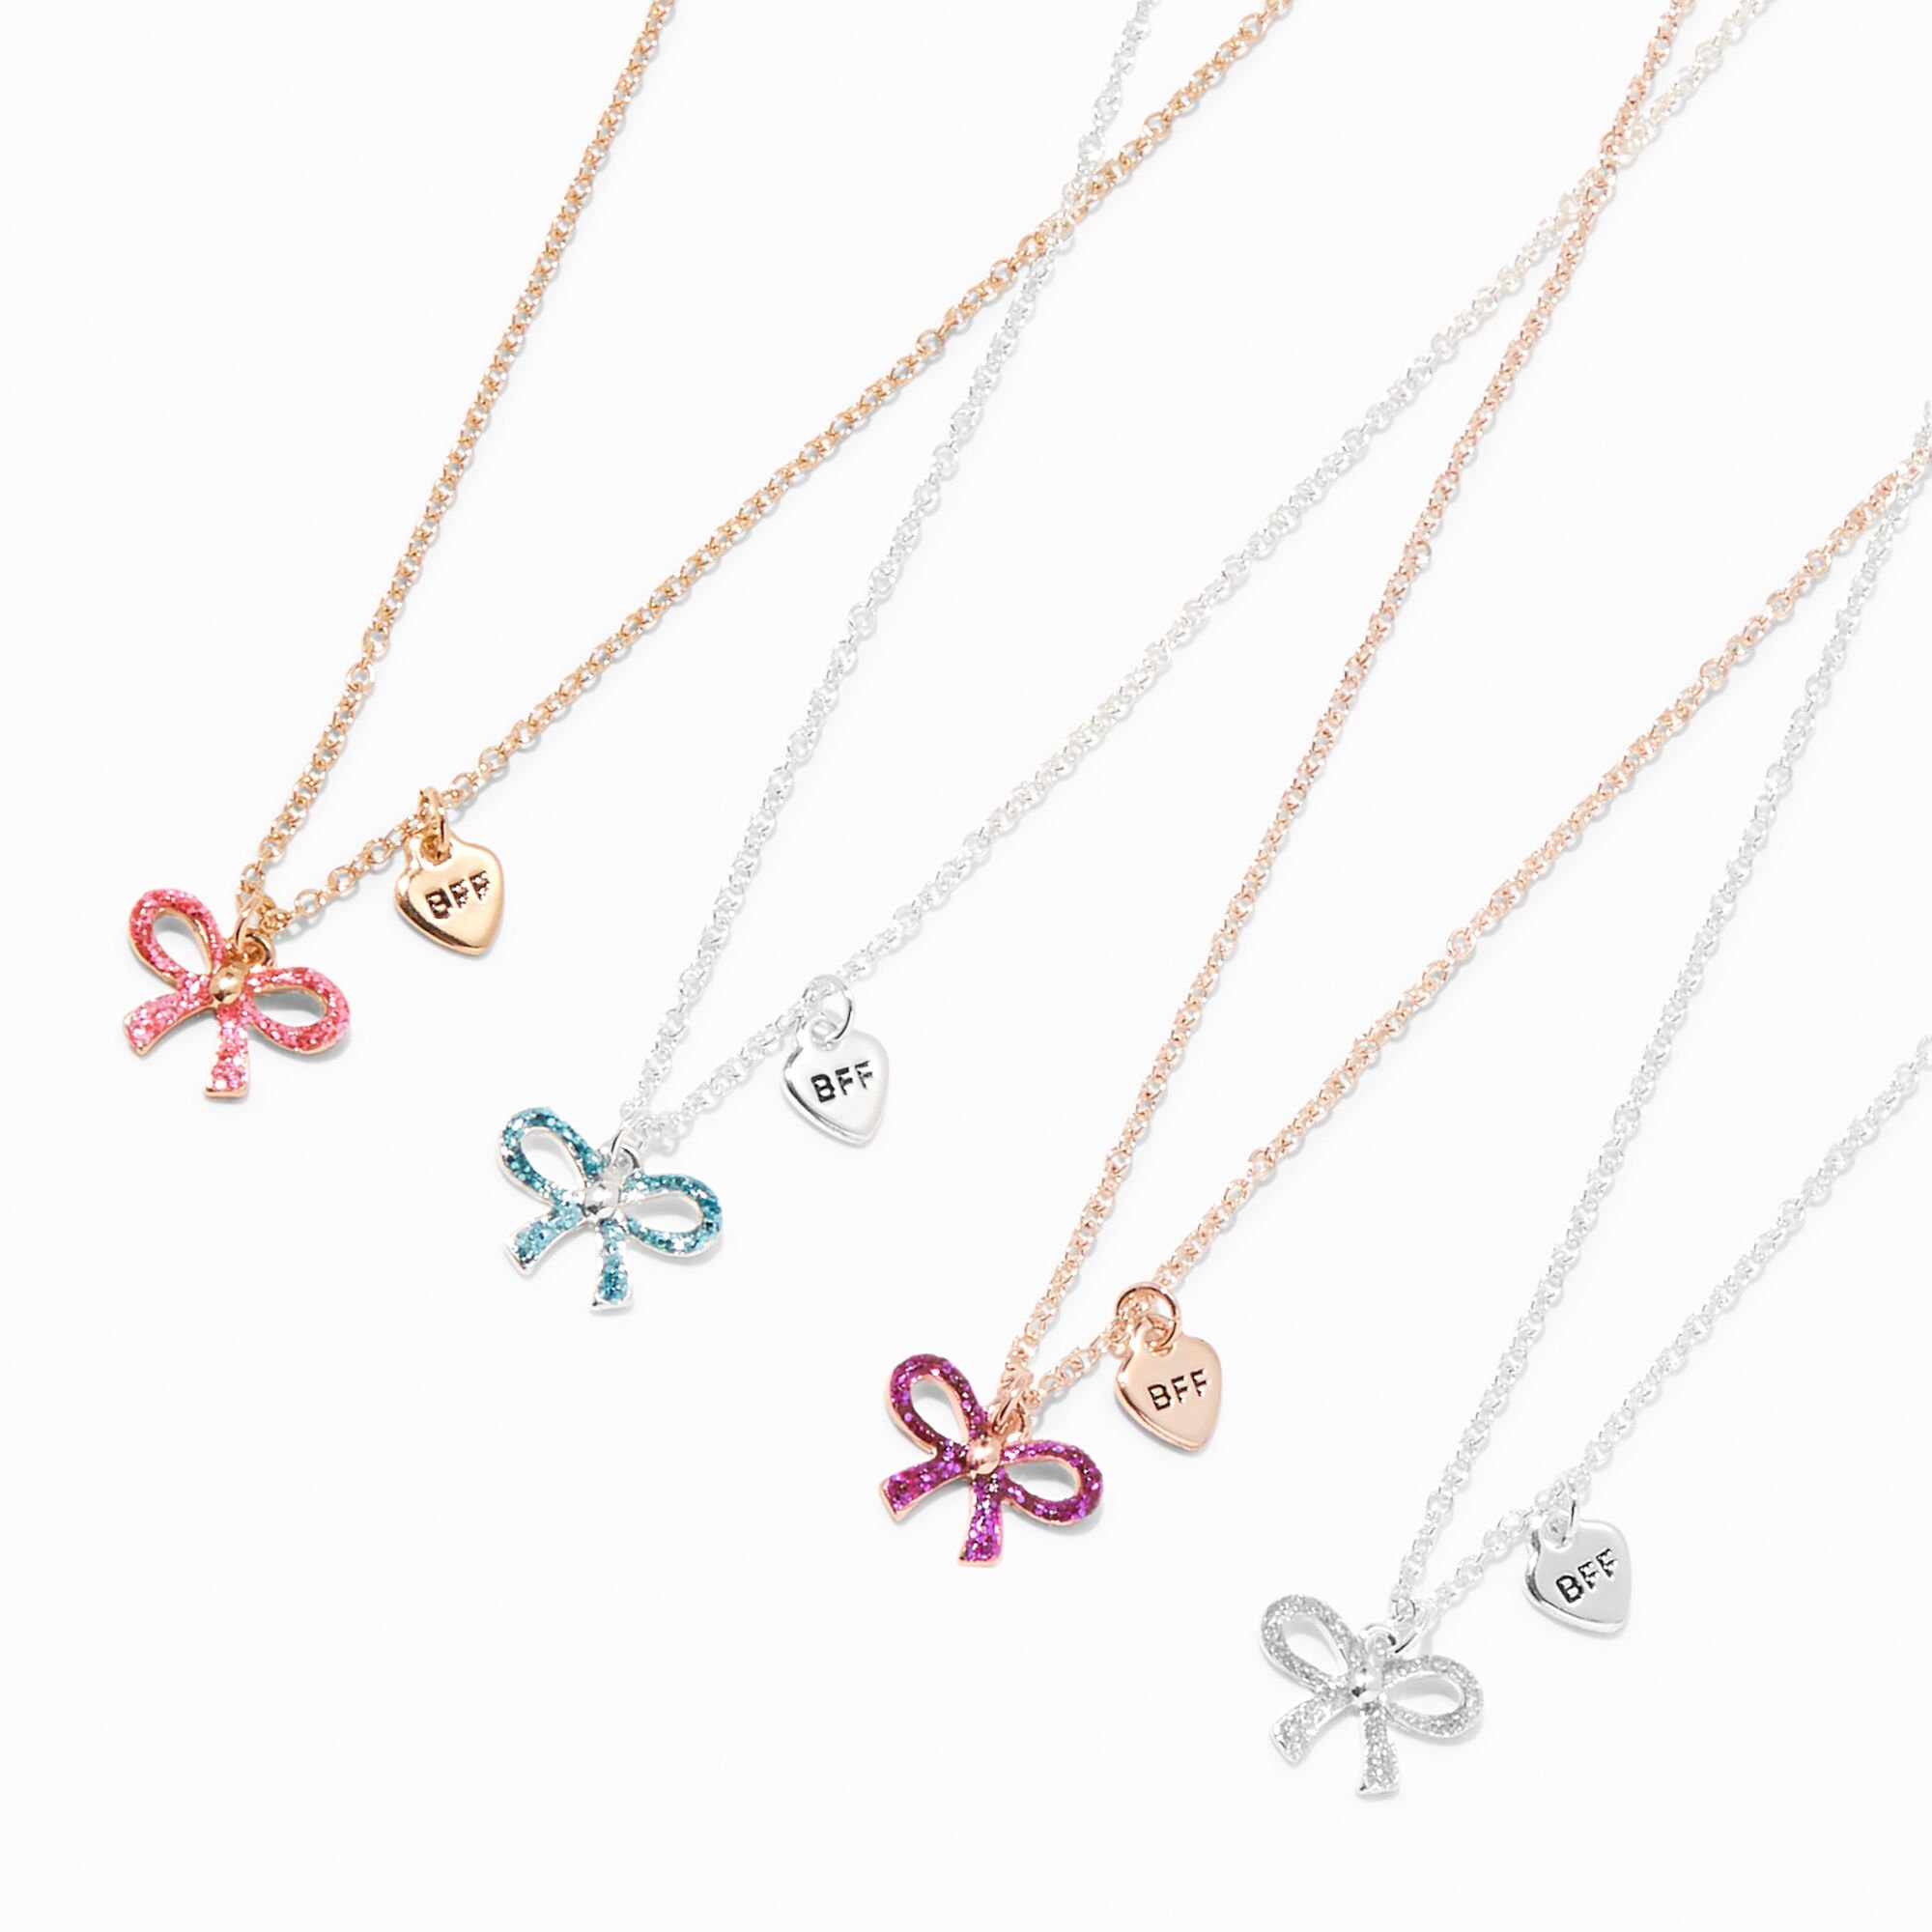 View Claires Best Friends Mixed Metal Glitter Bows Pendant Necklaces 4 Pack Gold information